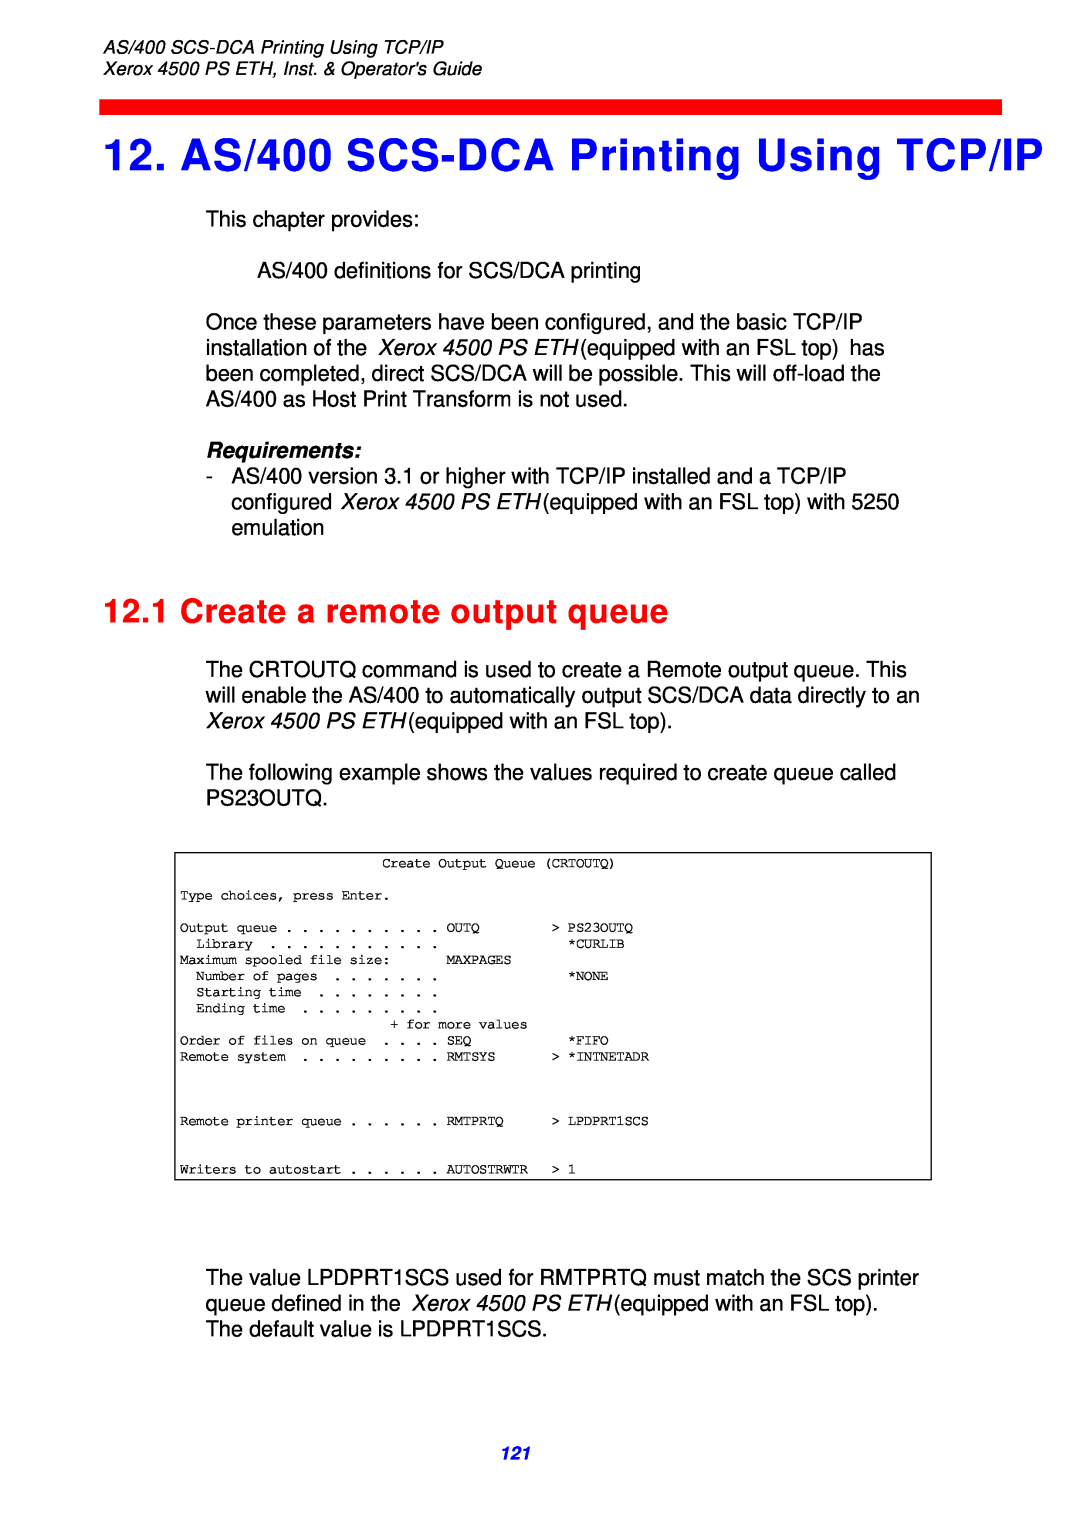 Xerox 4500 ps eth instruction manual 12. AS/400 SCS-DCA Printing Using TCP/IP, Create a remote output queue, Requirements 